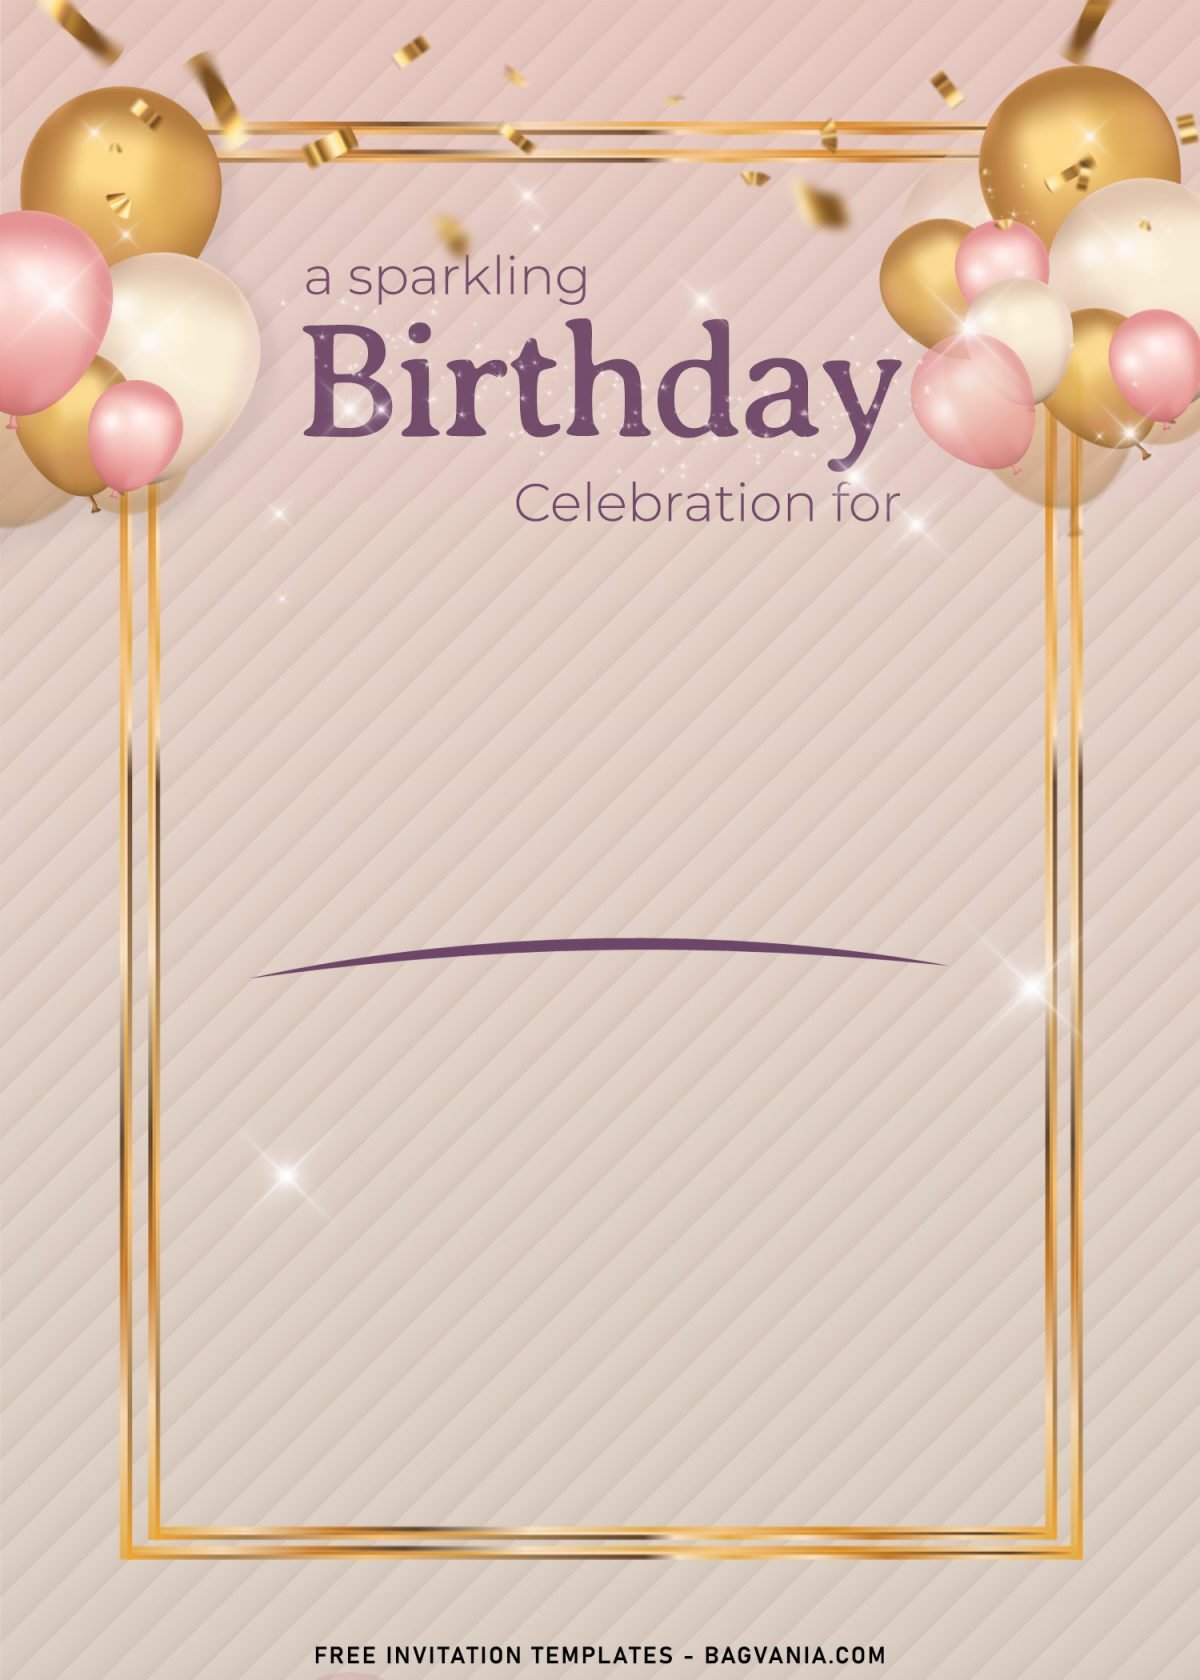 10+ Sparkling Balloons Birthday Invitation Templates Suitable For All Ages with Stunning gold frame